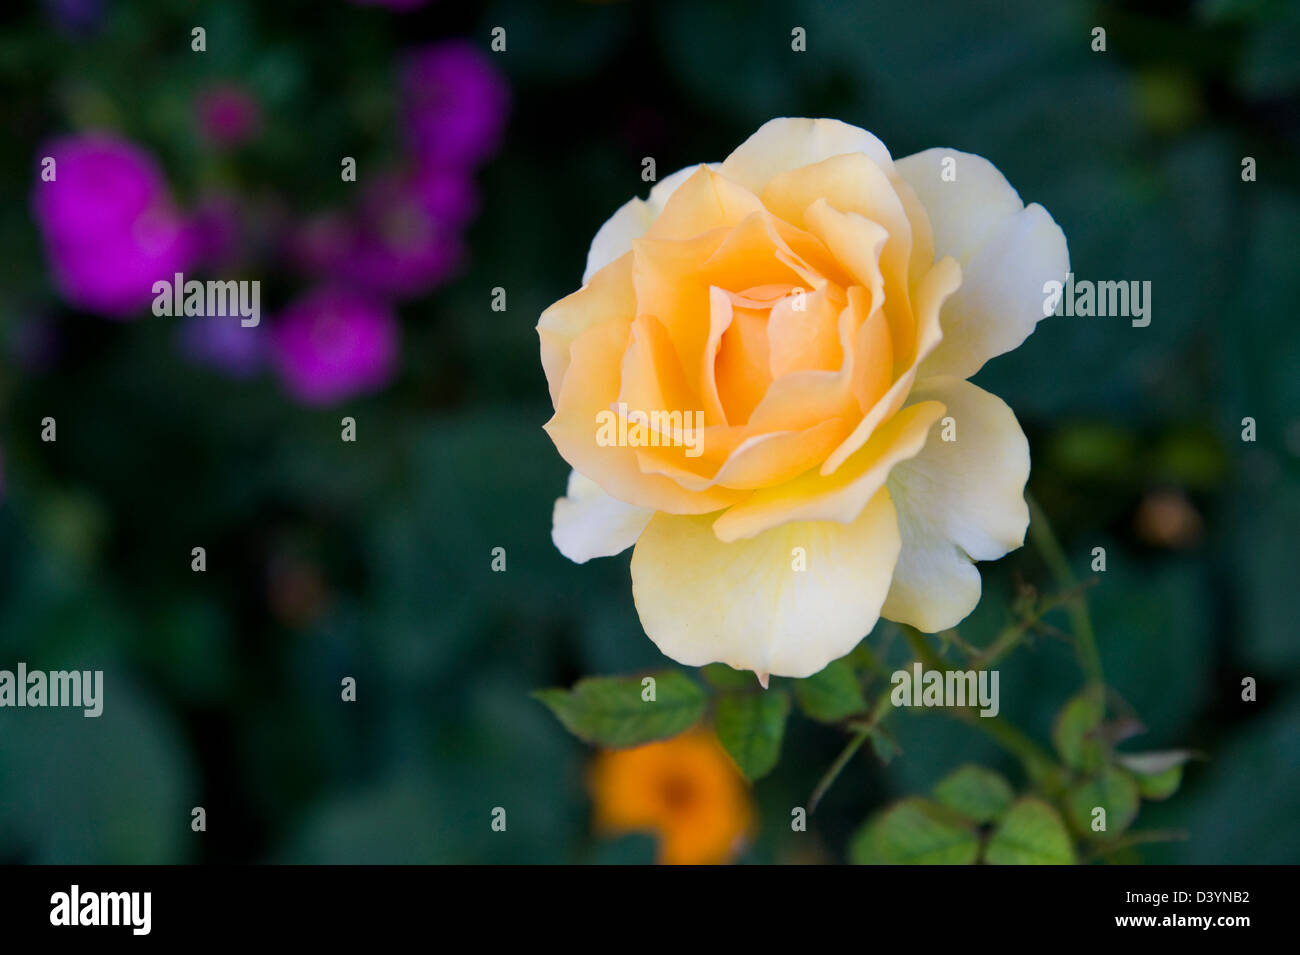 Bettina Rose High Resolution Stock Photography and Images - Alamy